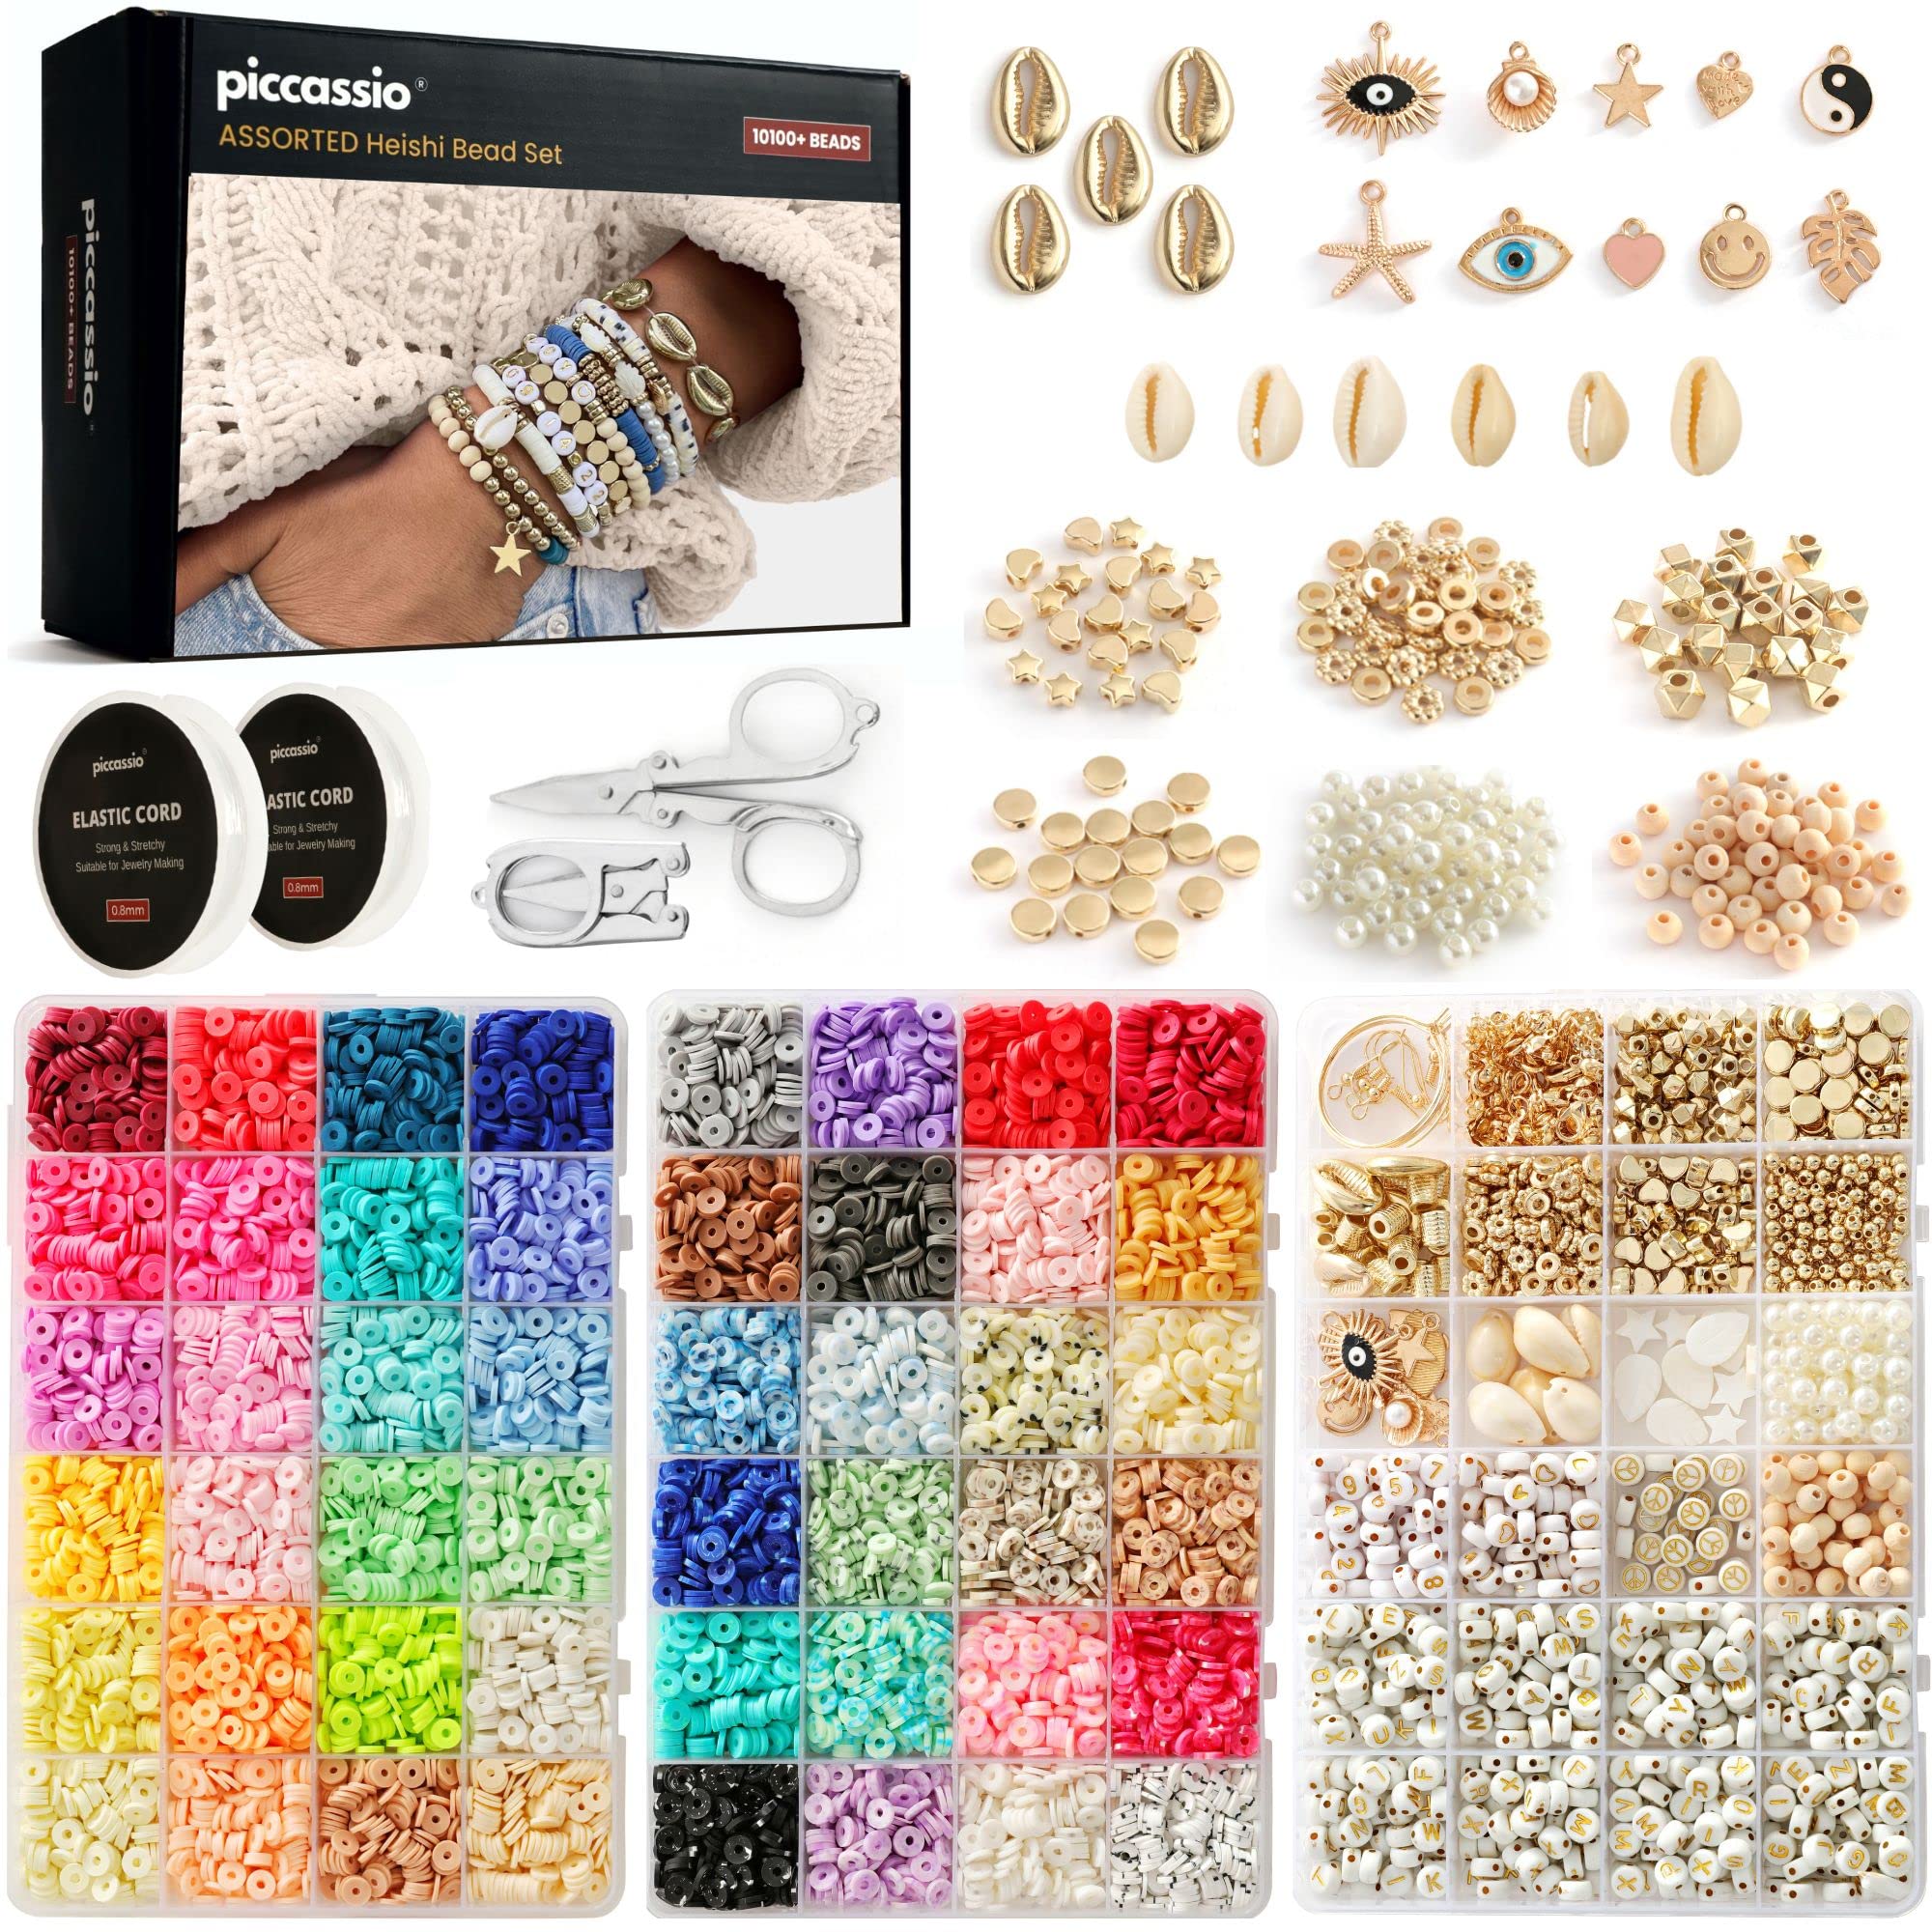 Redtwo 6200 Pcs Clay Beads Bracelet Making Kit, Flat Round Polymer Heishi  Friendship Bracelet Jewelry Kit with Charms and Elastic Strings for Girls